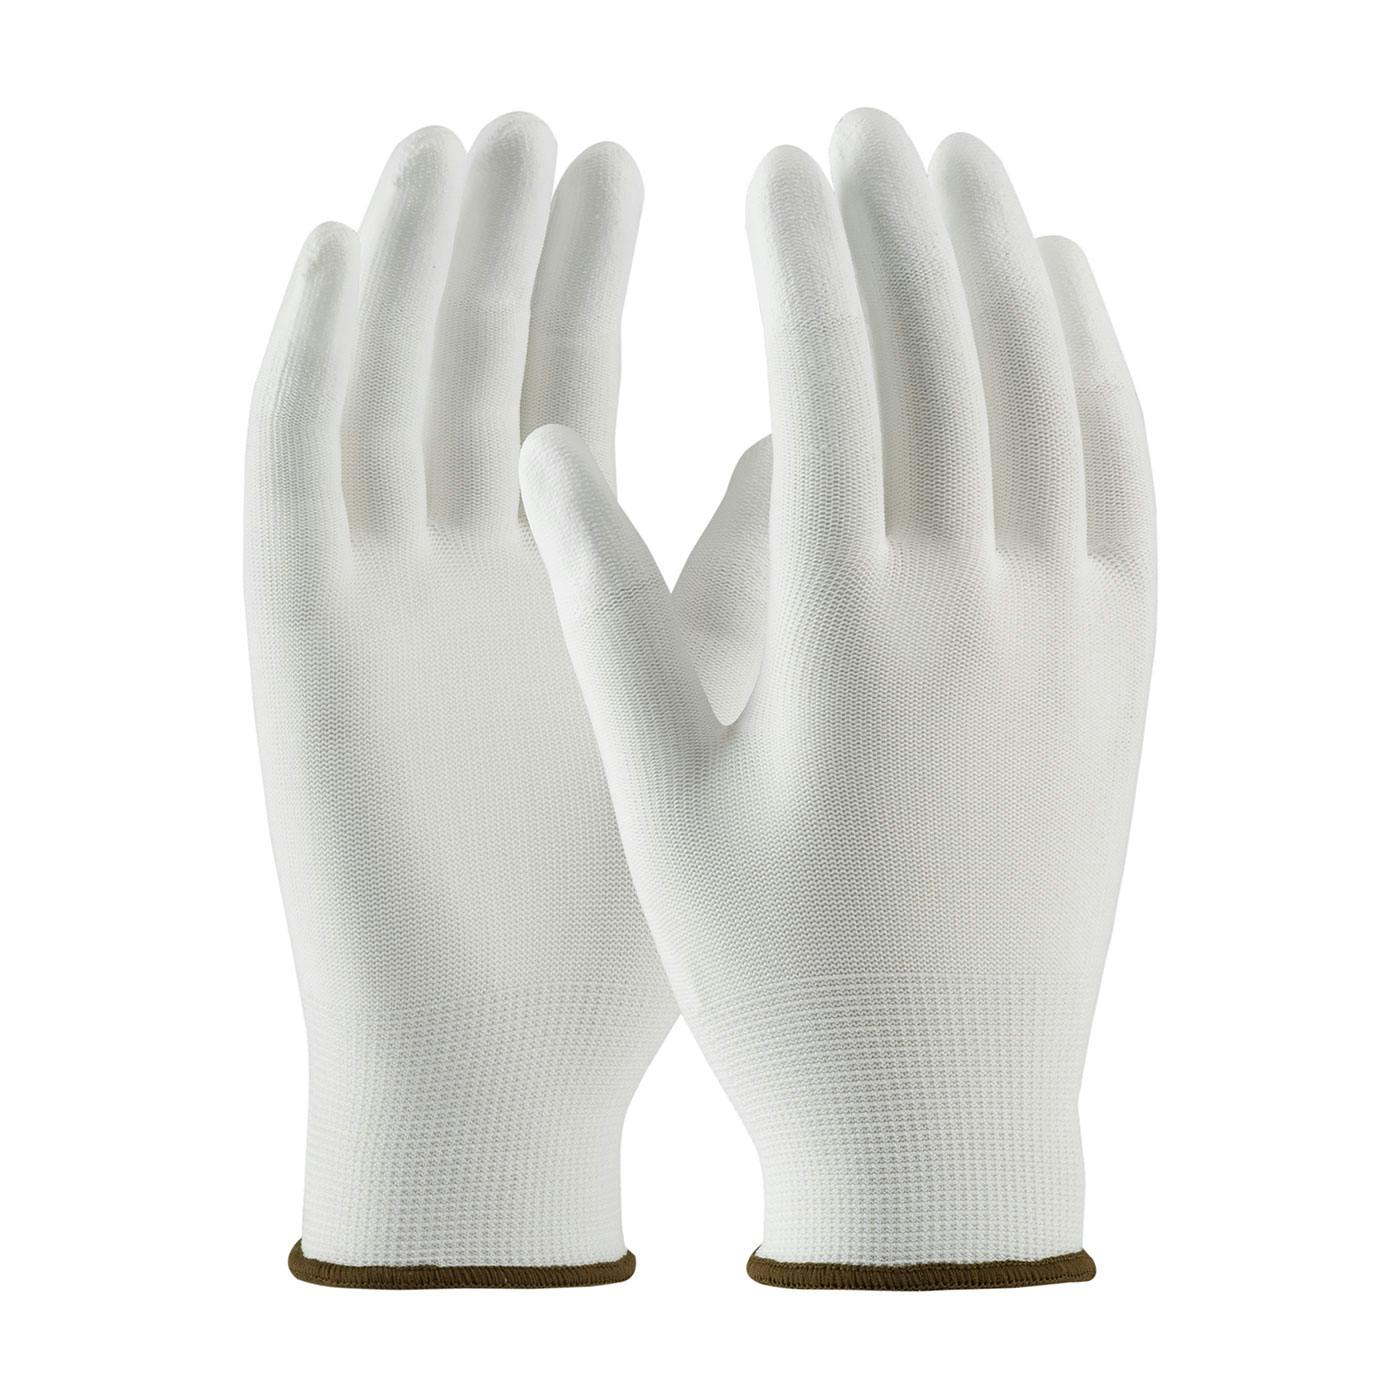 CleanTeam® Seamless Knit Nylon Clean Environment Glove with Polyurethane Coated Smooth Grip on Fingertips (99-126)